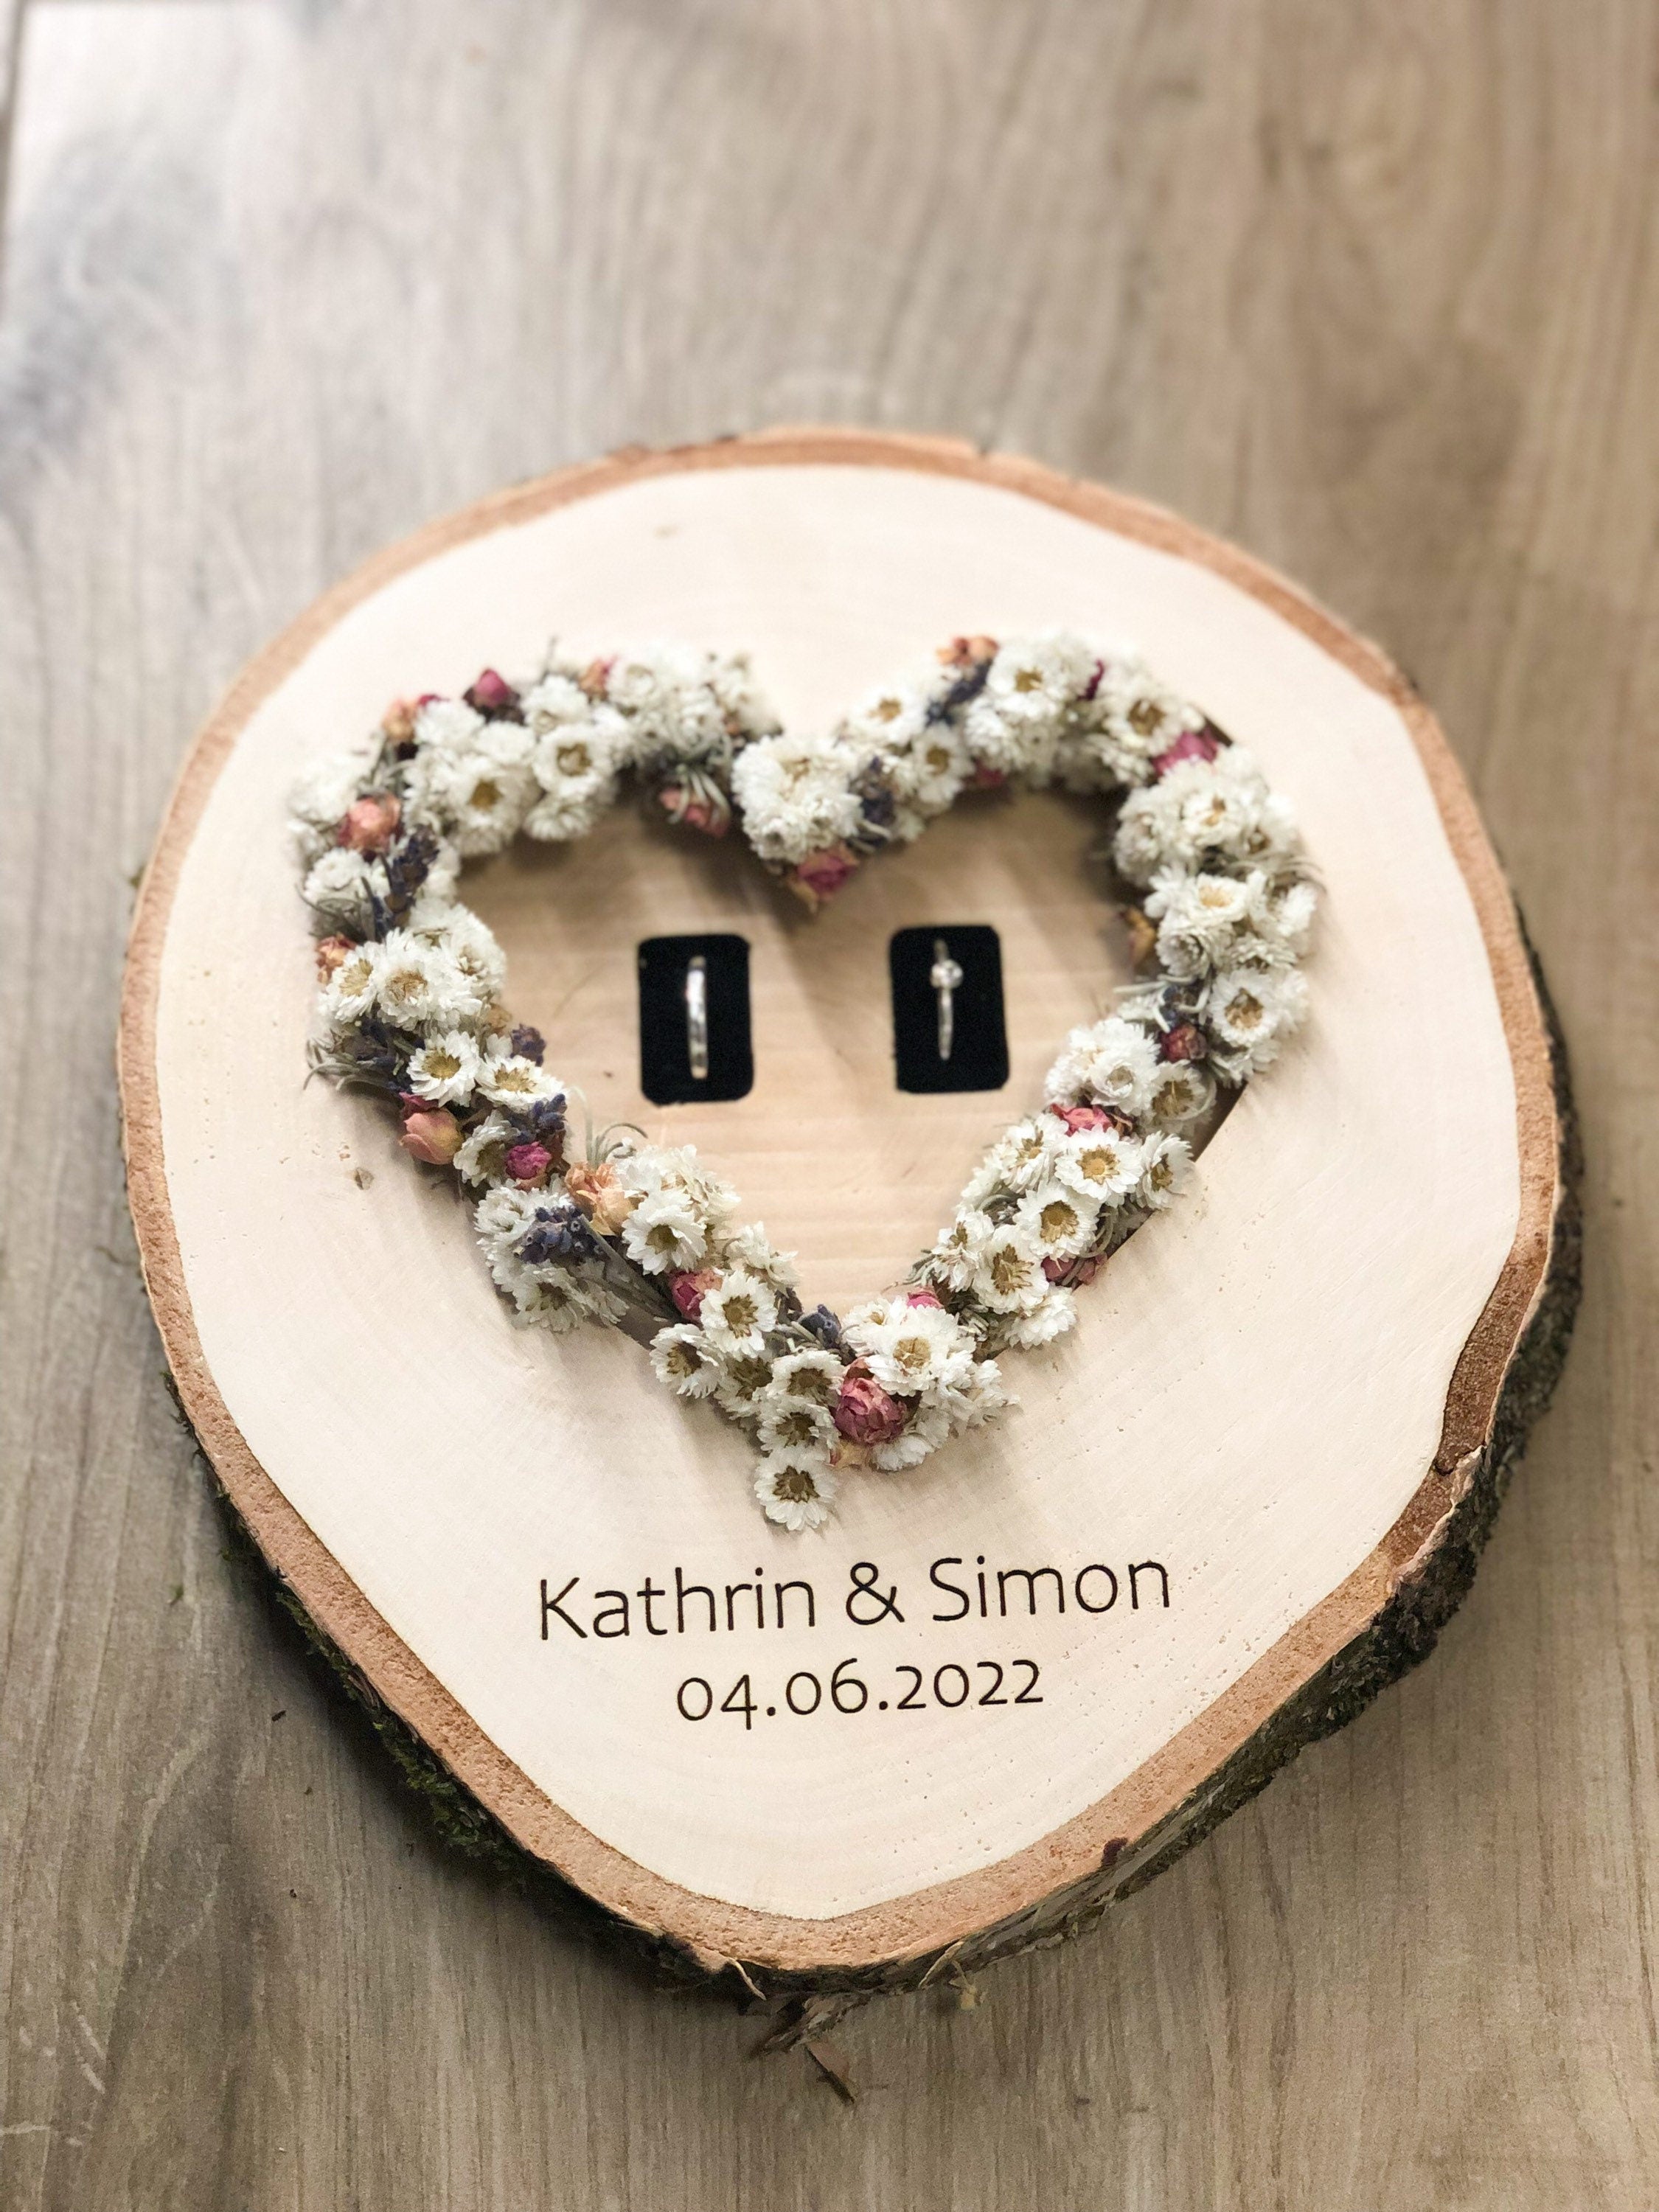 Ring pillow made of birch wood personalized approx. 20-25cm tall (without flowers)